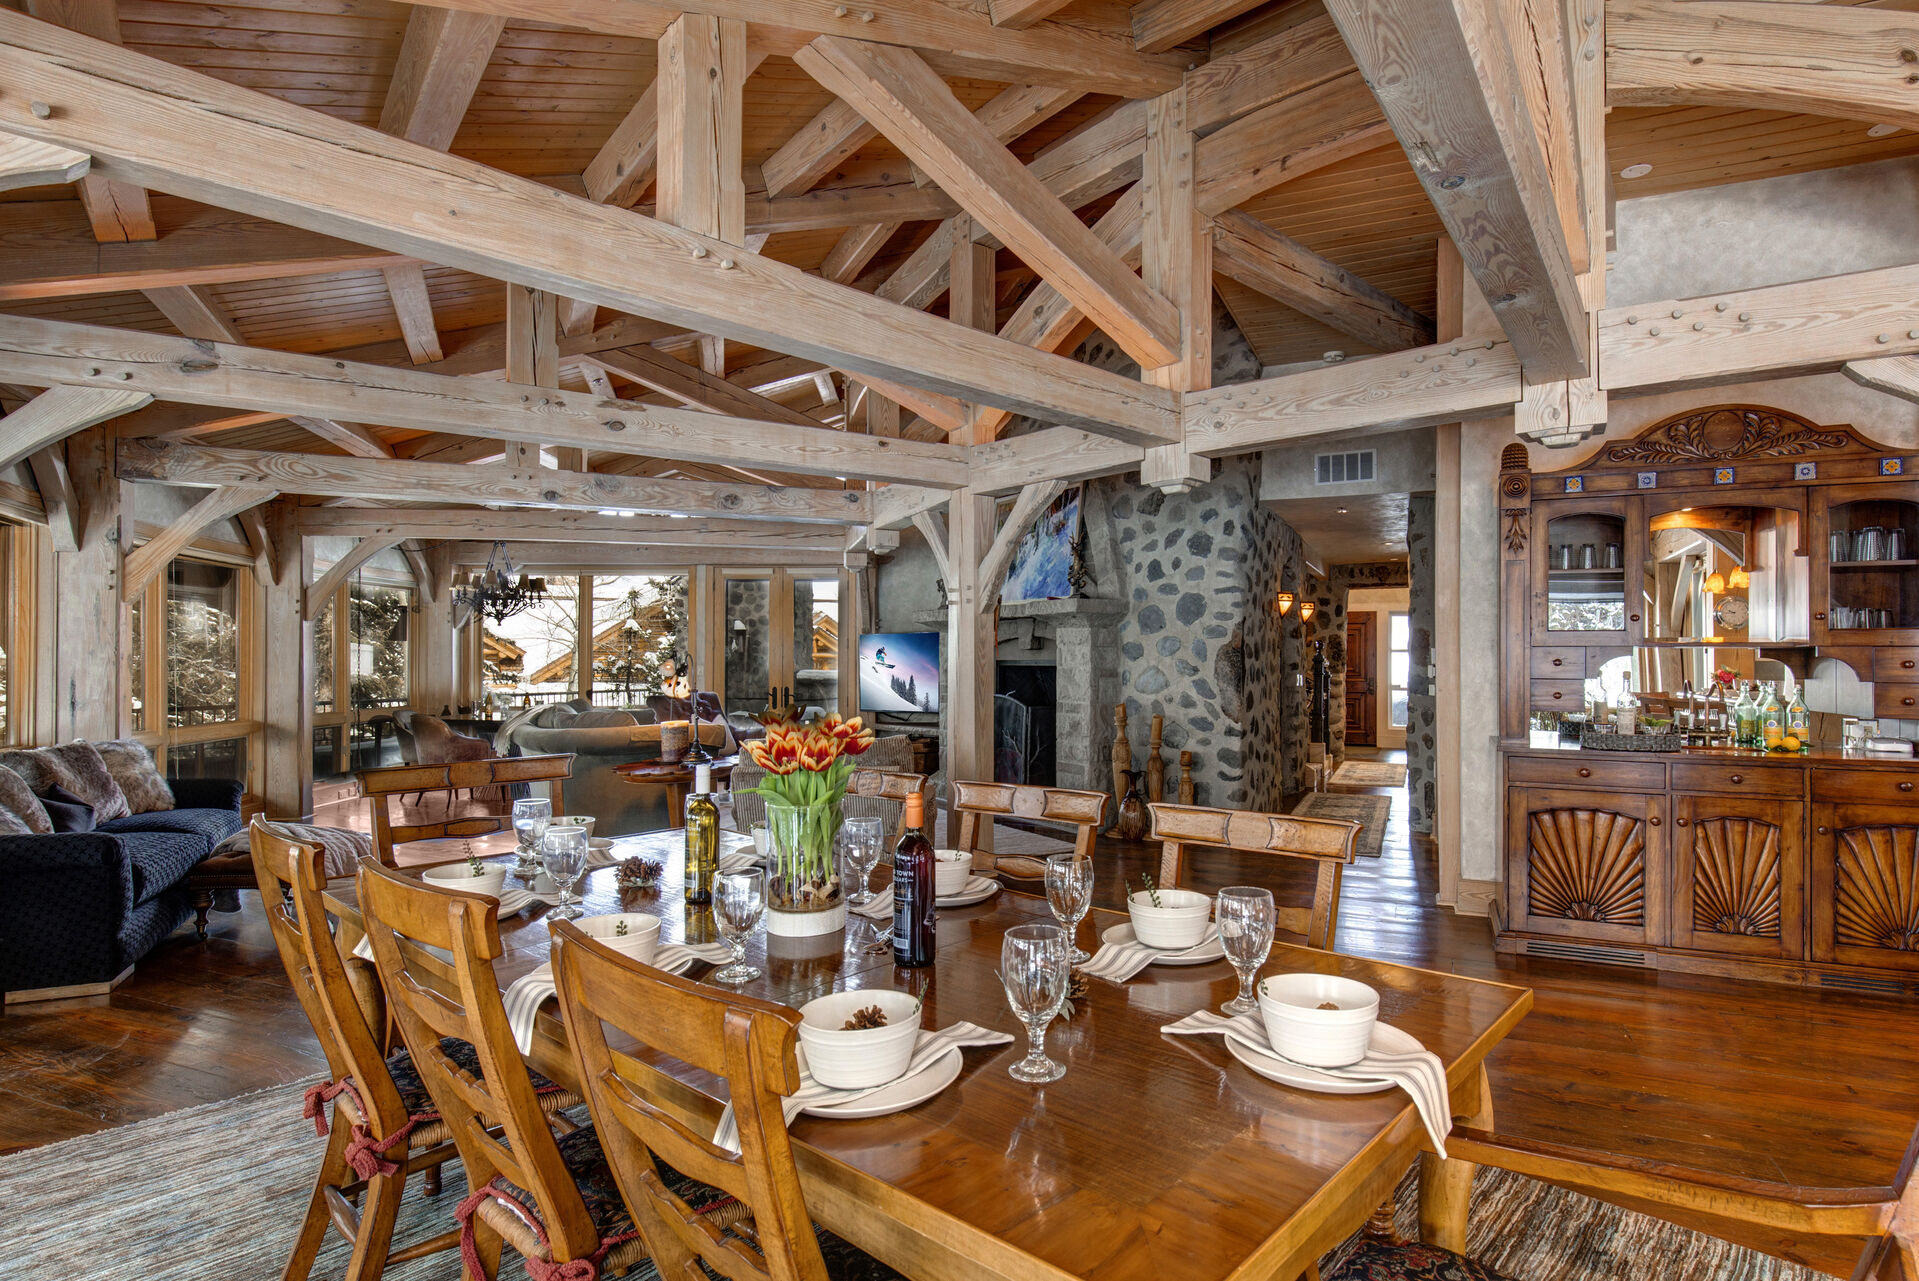 Dining Area with seating for 8, deck access, and ski slope views